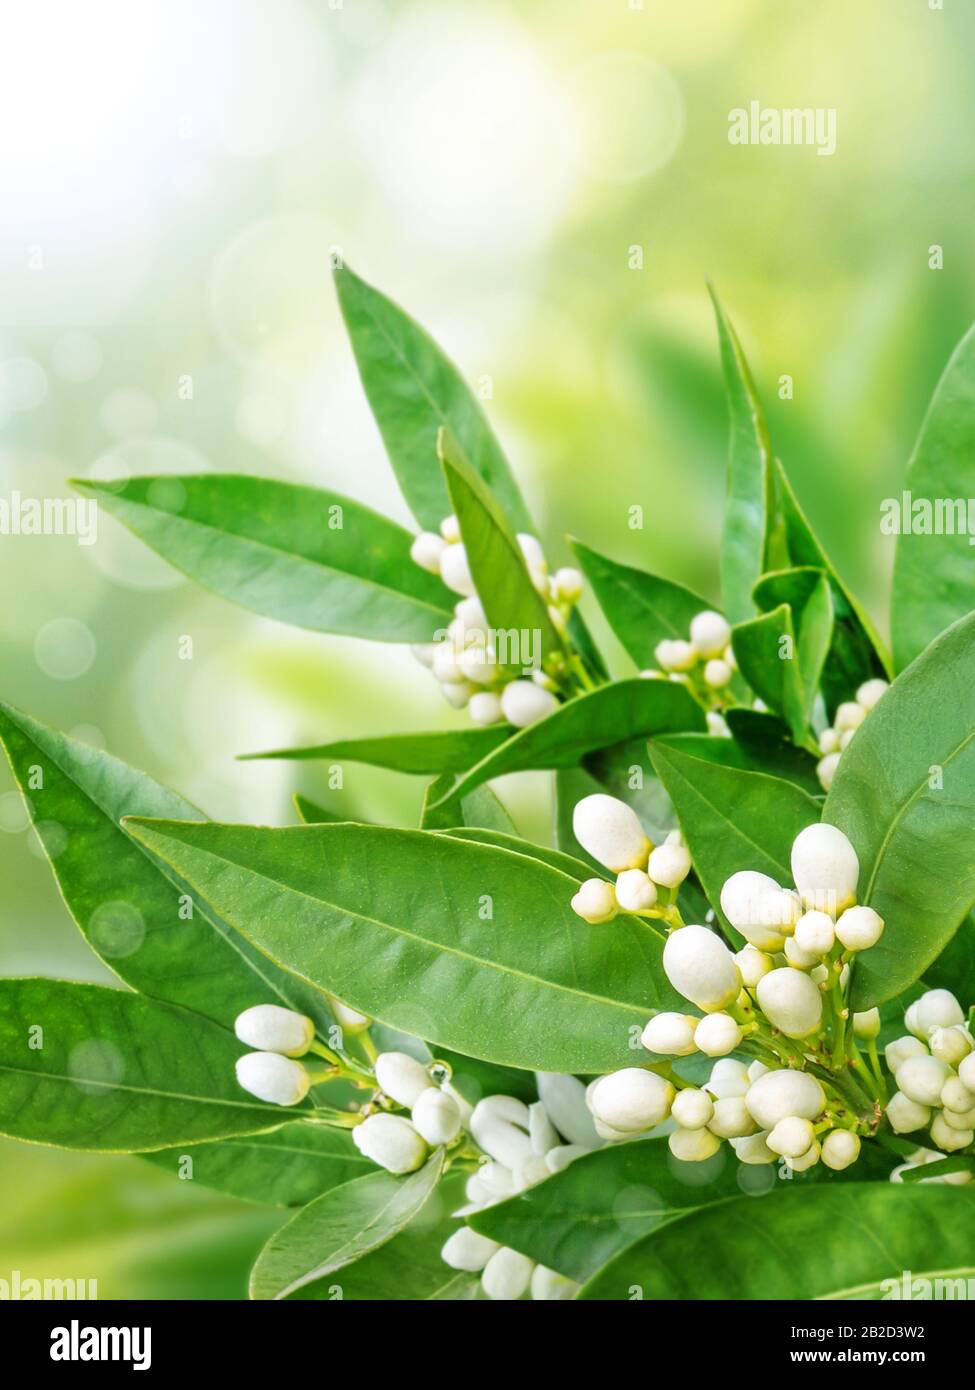 Orange flowers on the spring blurred garden vertical background. Neroli blossom. White buds and green leaves. Stock Photo